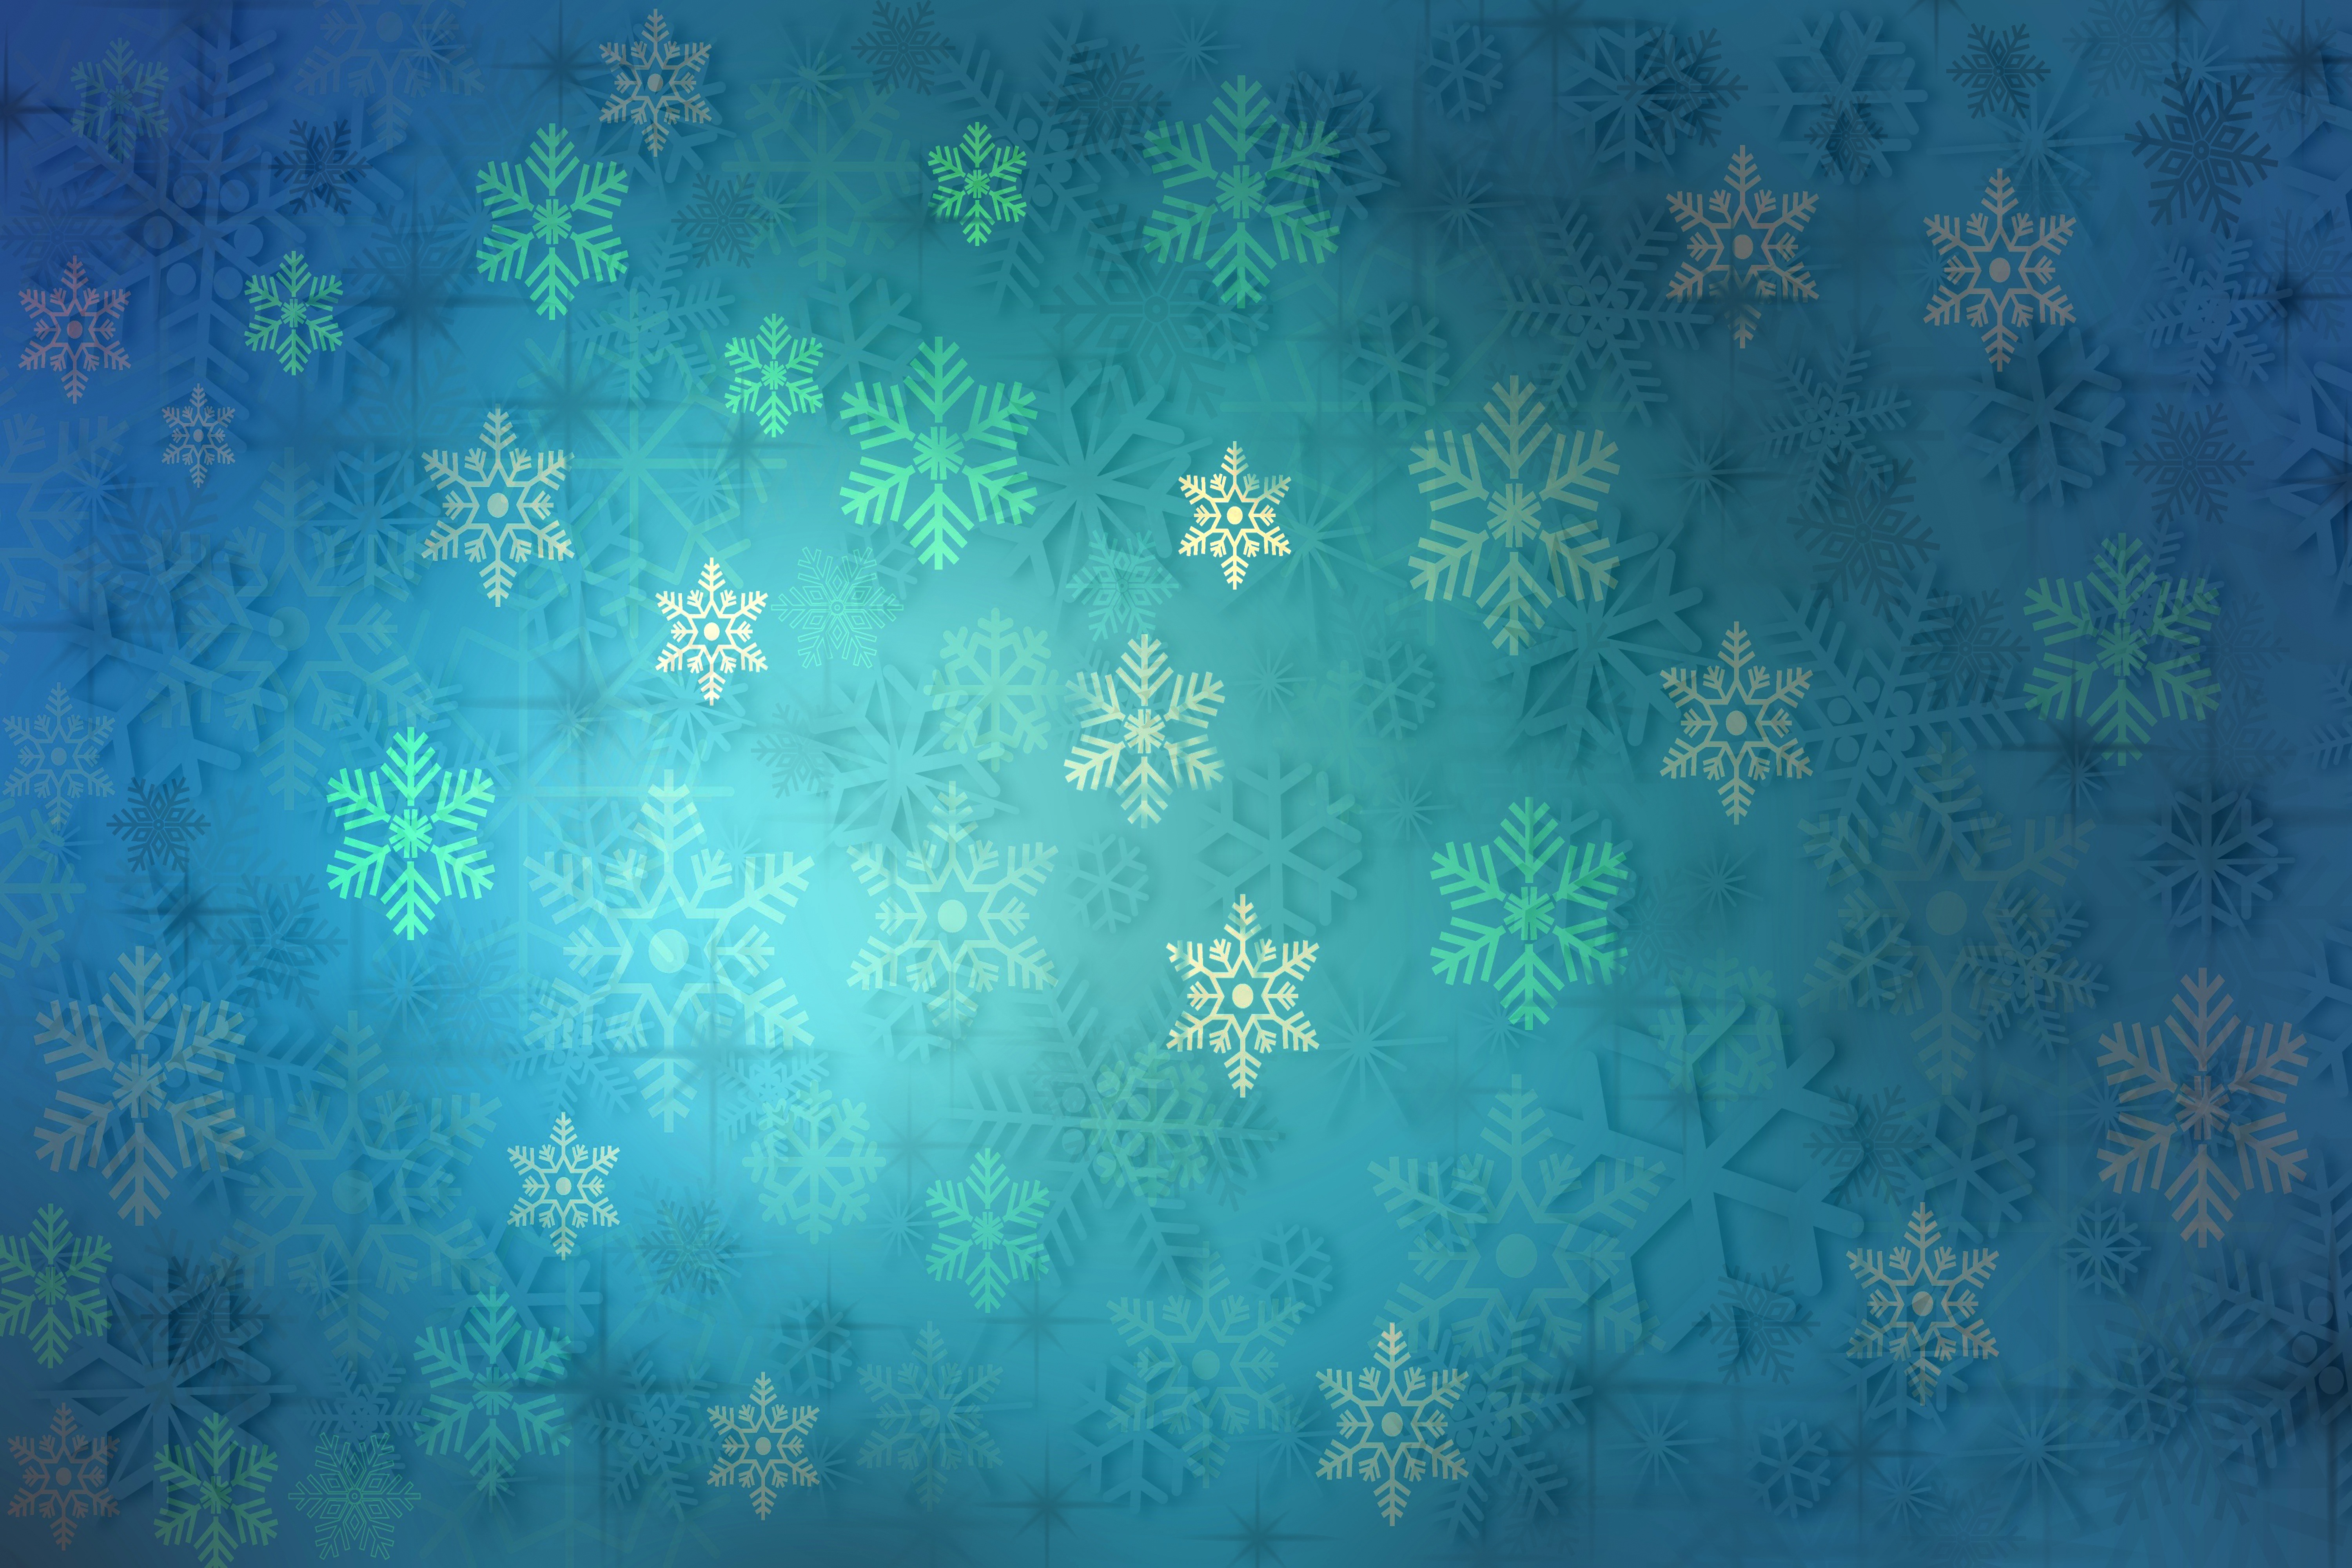 pattern, snowflakes, texture, new year, textures, christmas, blue, holiday 2160p